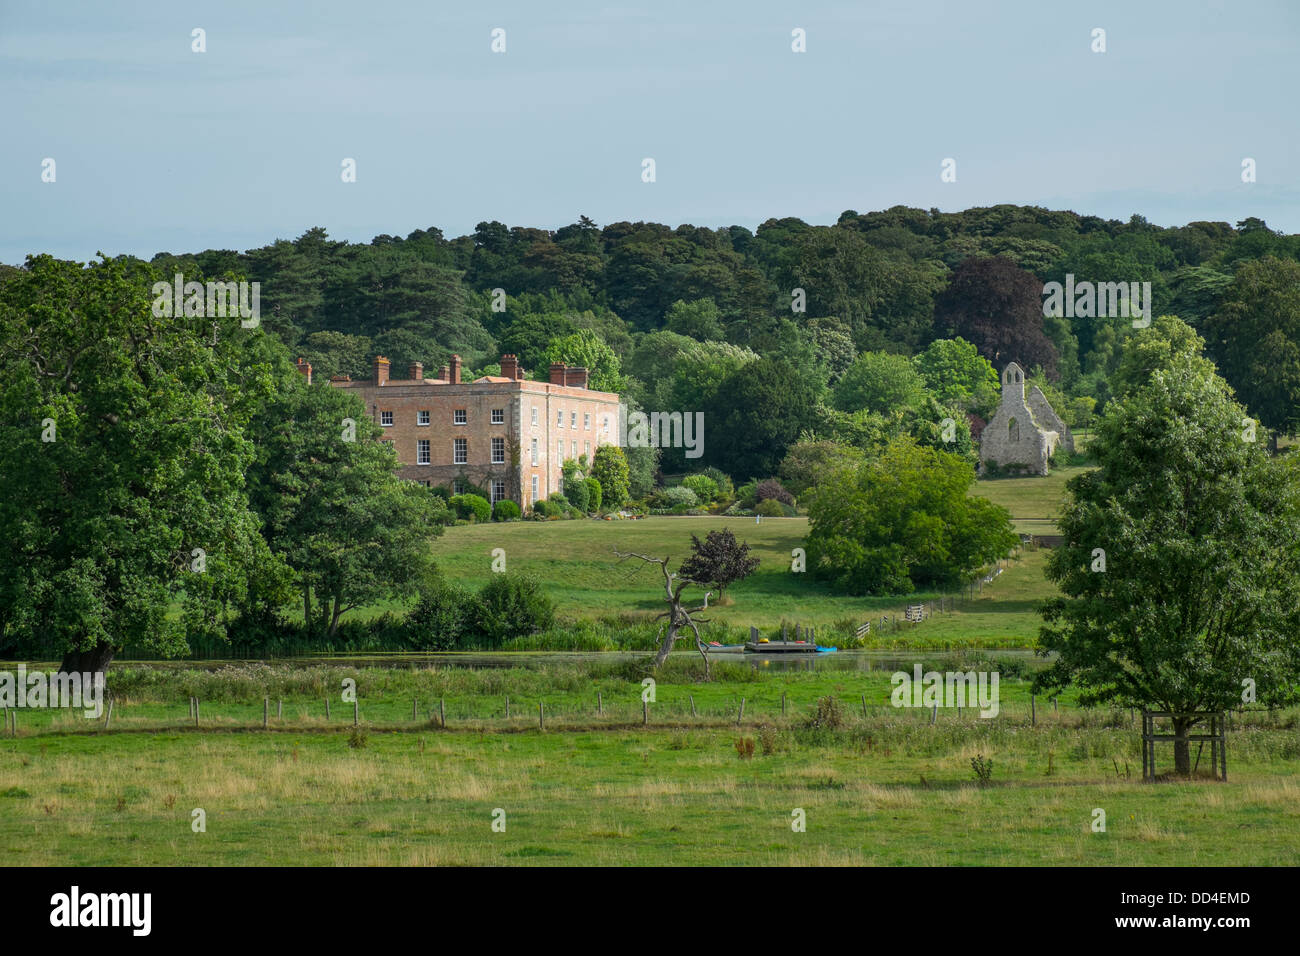 View of Bayfield hall,18th century Georgian country house, showing the ruins of the 11th Century Parish Church of St. Margaret, Stock Photo